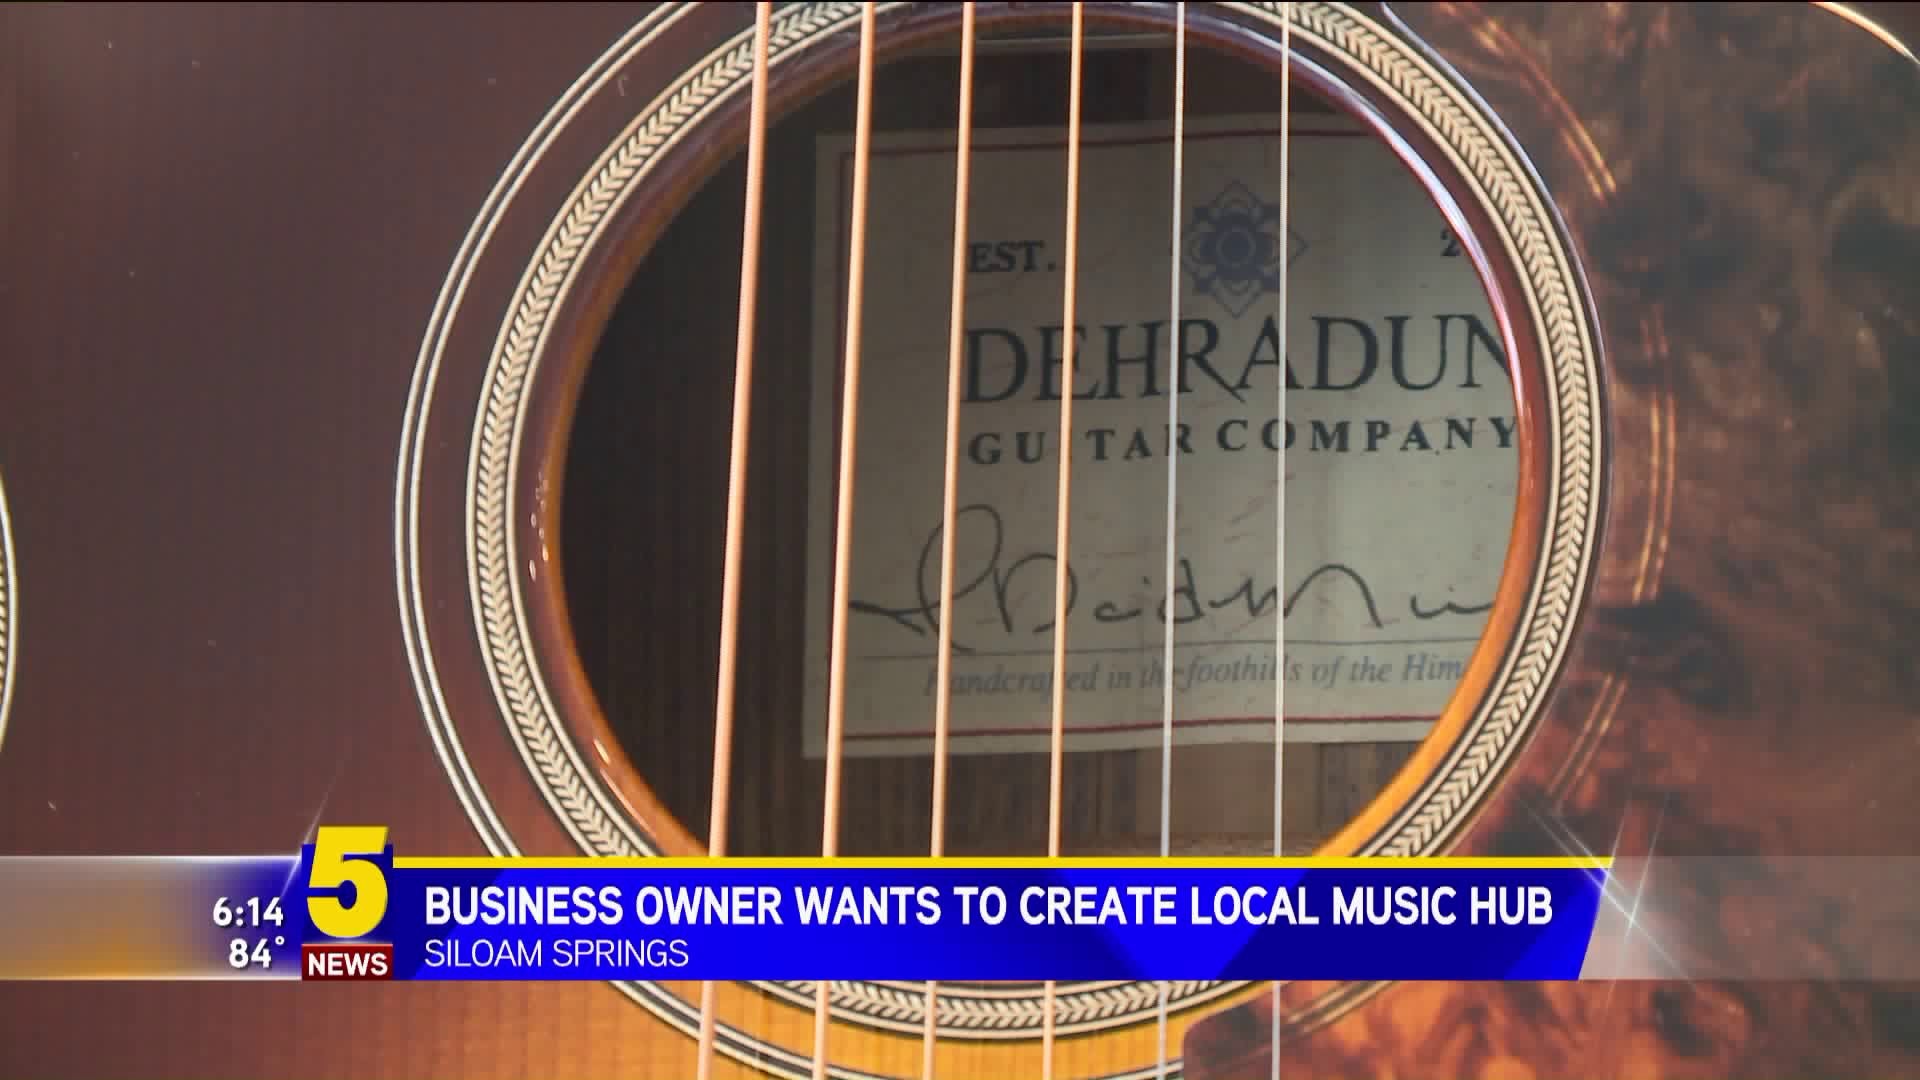 Business Owner Wants To Create Local Music Hub